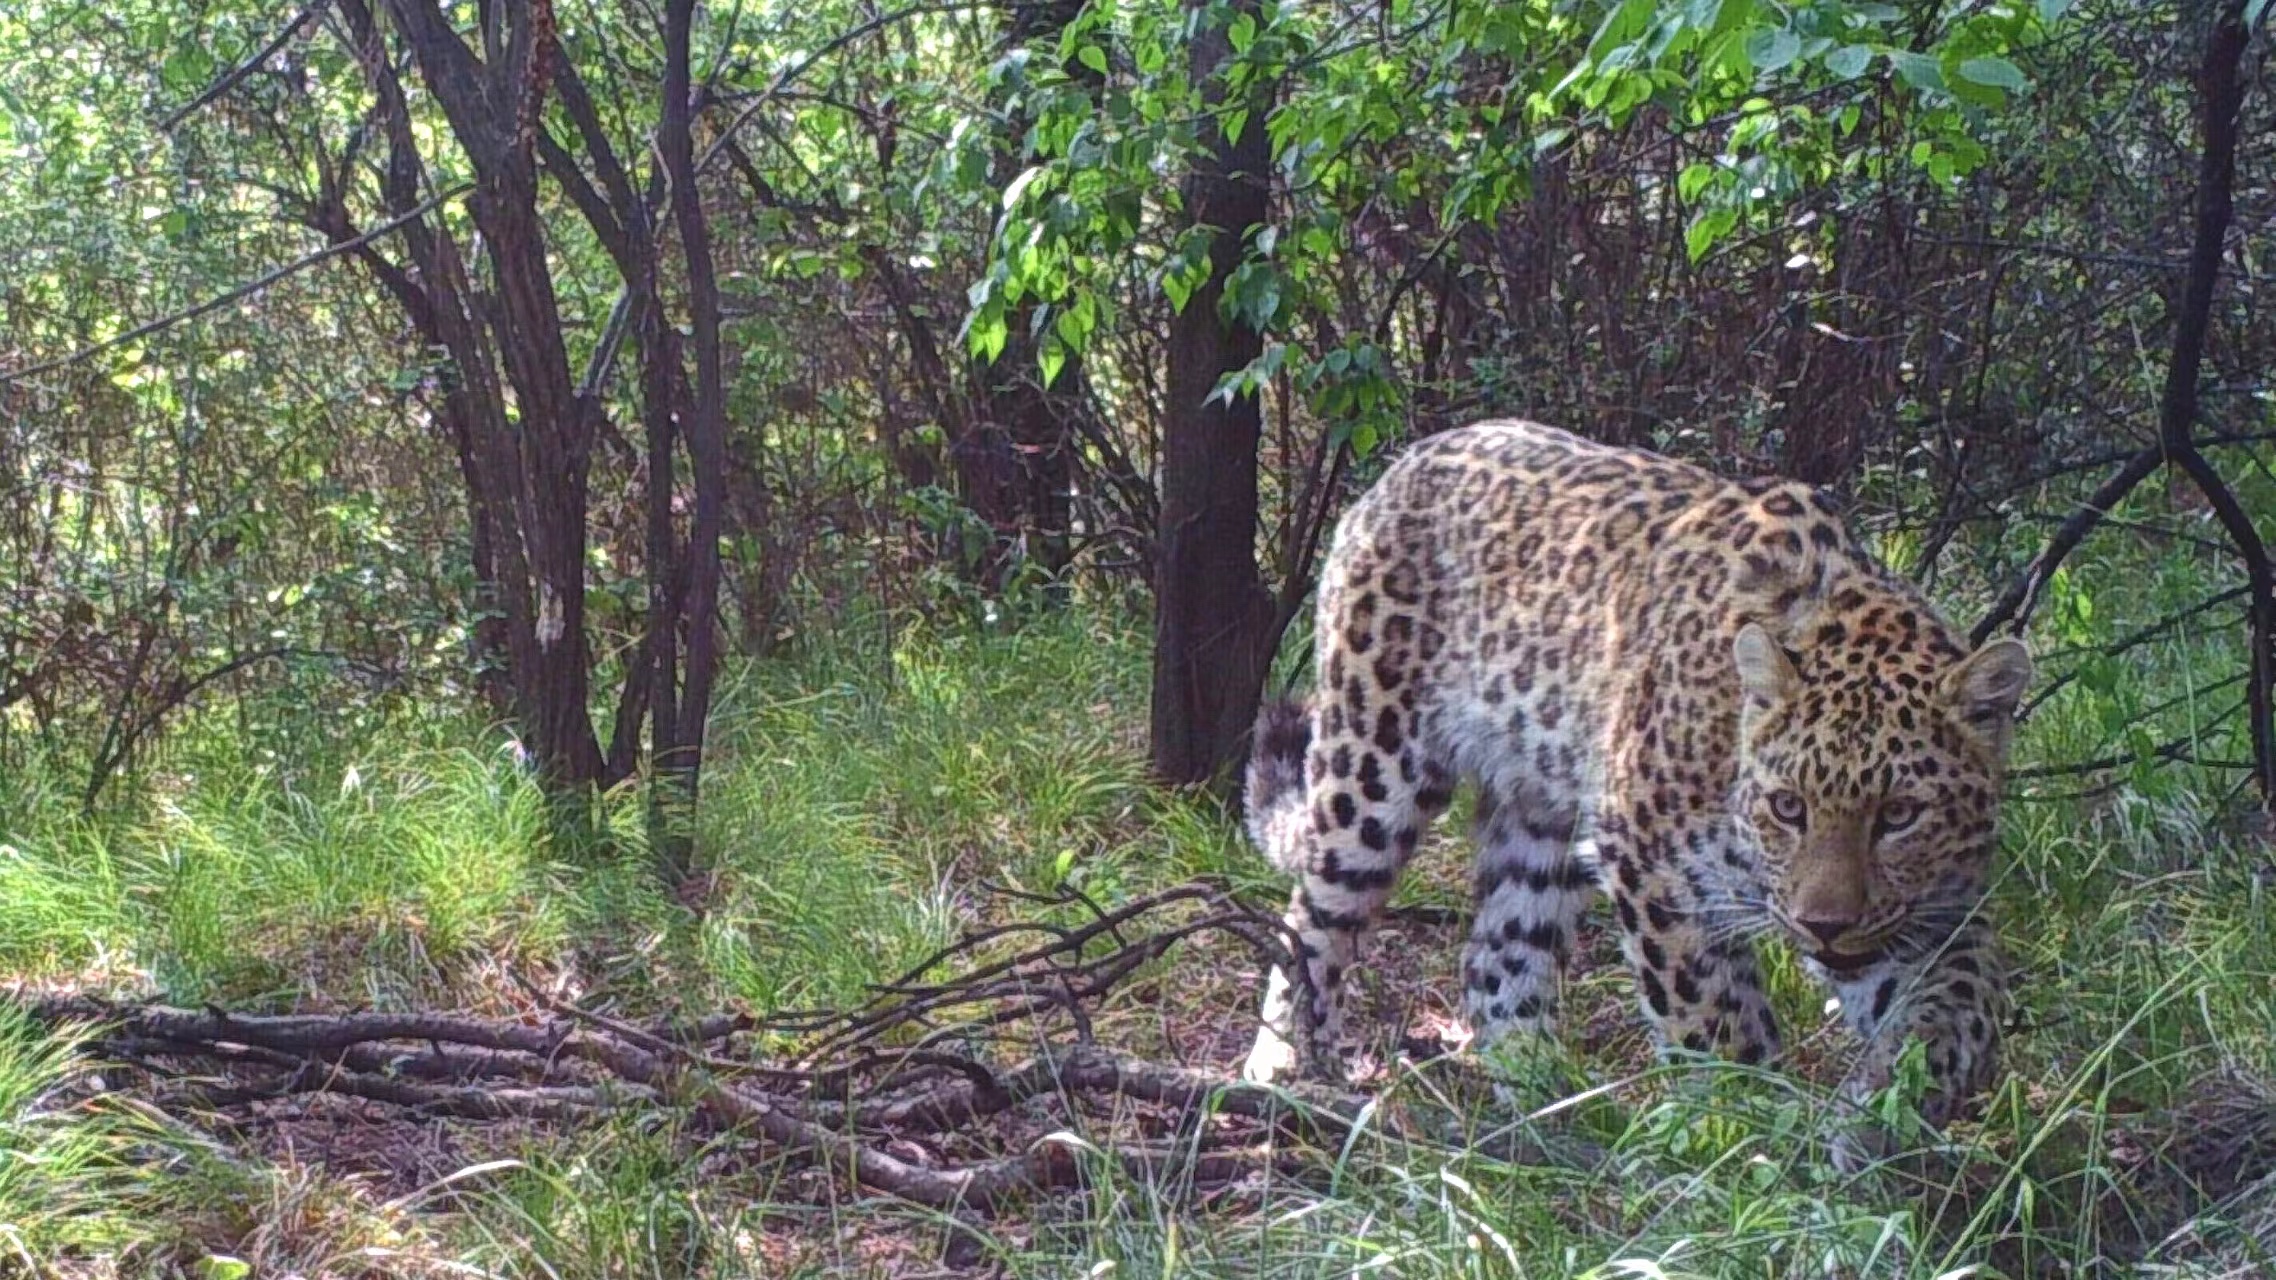 F2, the second female leopard identified by the CFCA, in a forest in Heshun County, Jinzhong City, north China's Shanxi Province, July 2015. /CFCA